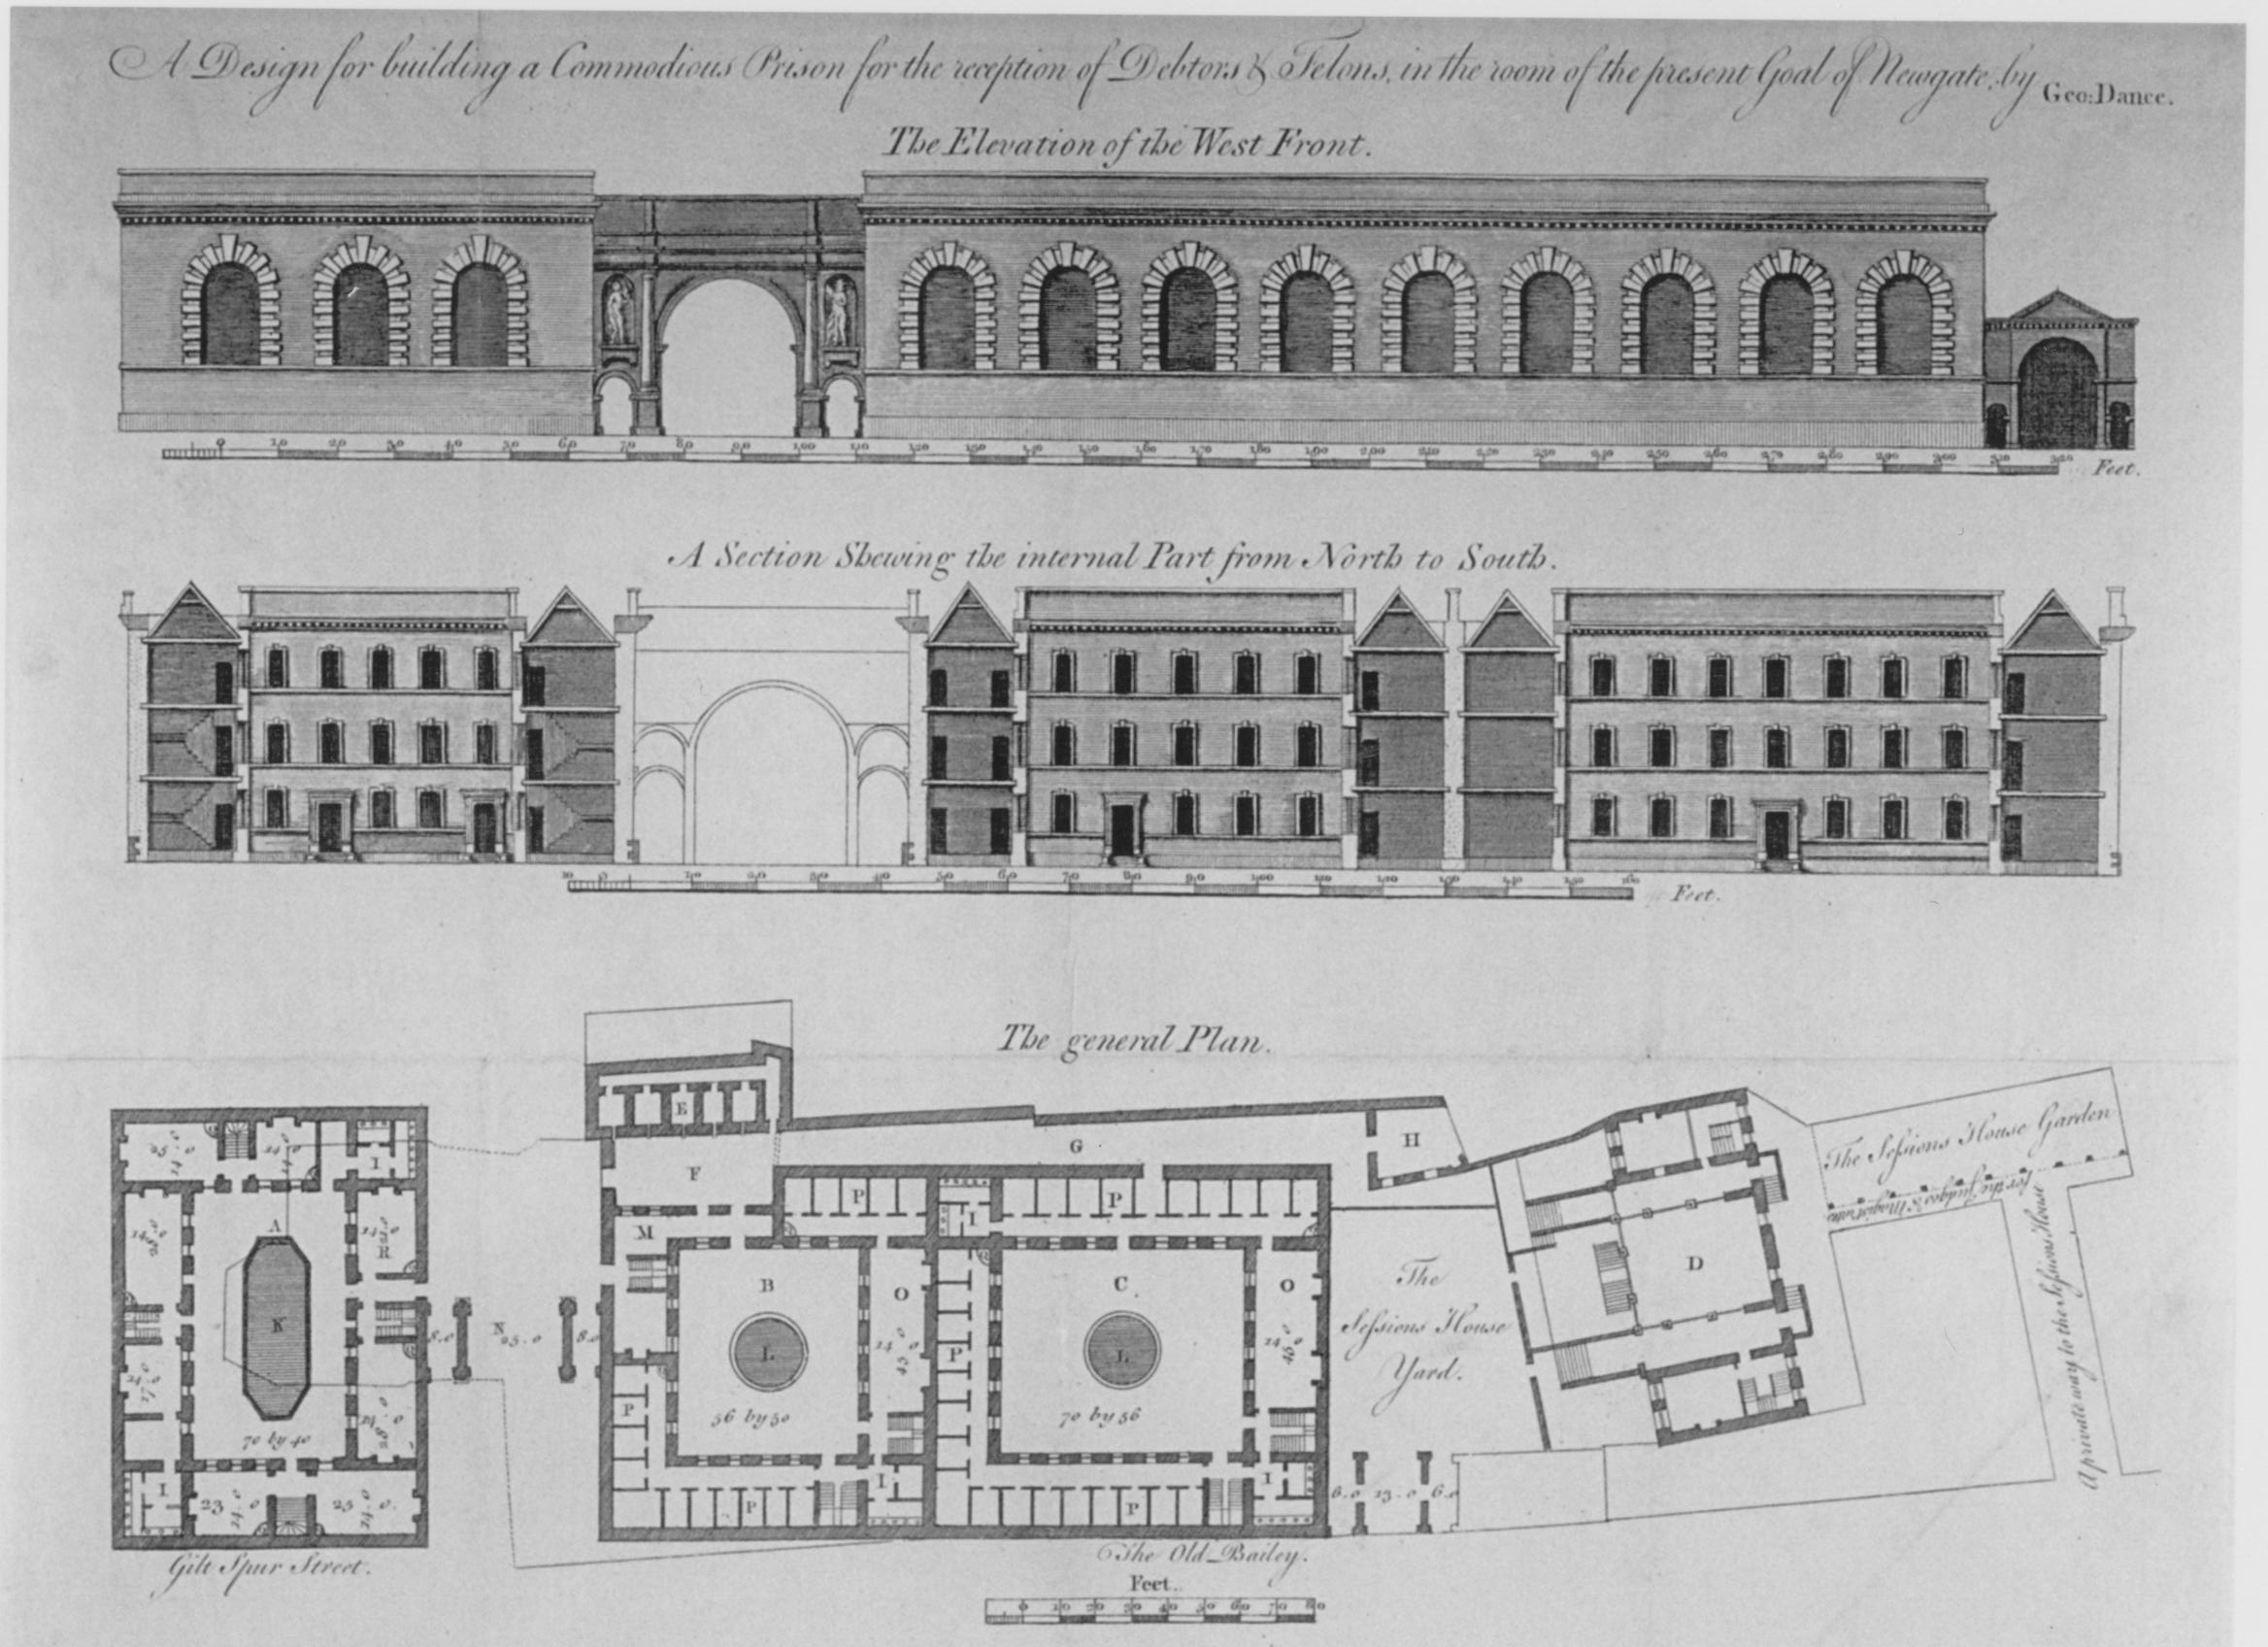 The front elevation of a long stone built prison, with a plan of the interior laid out below